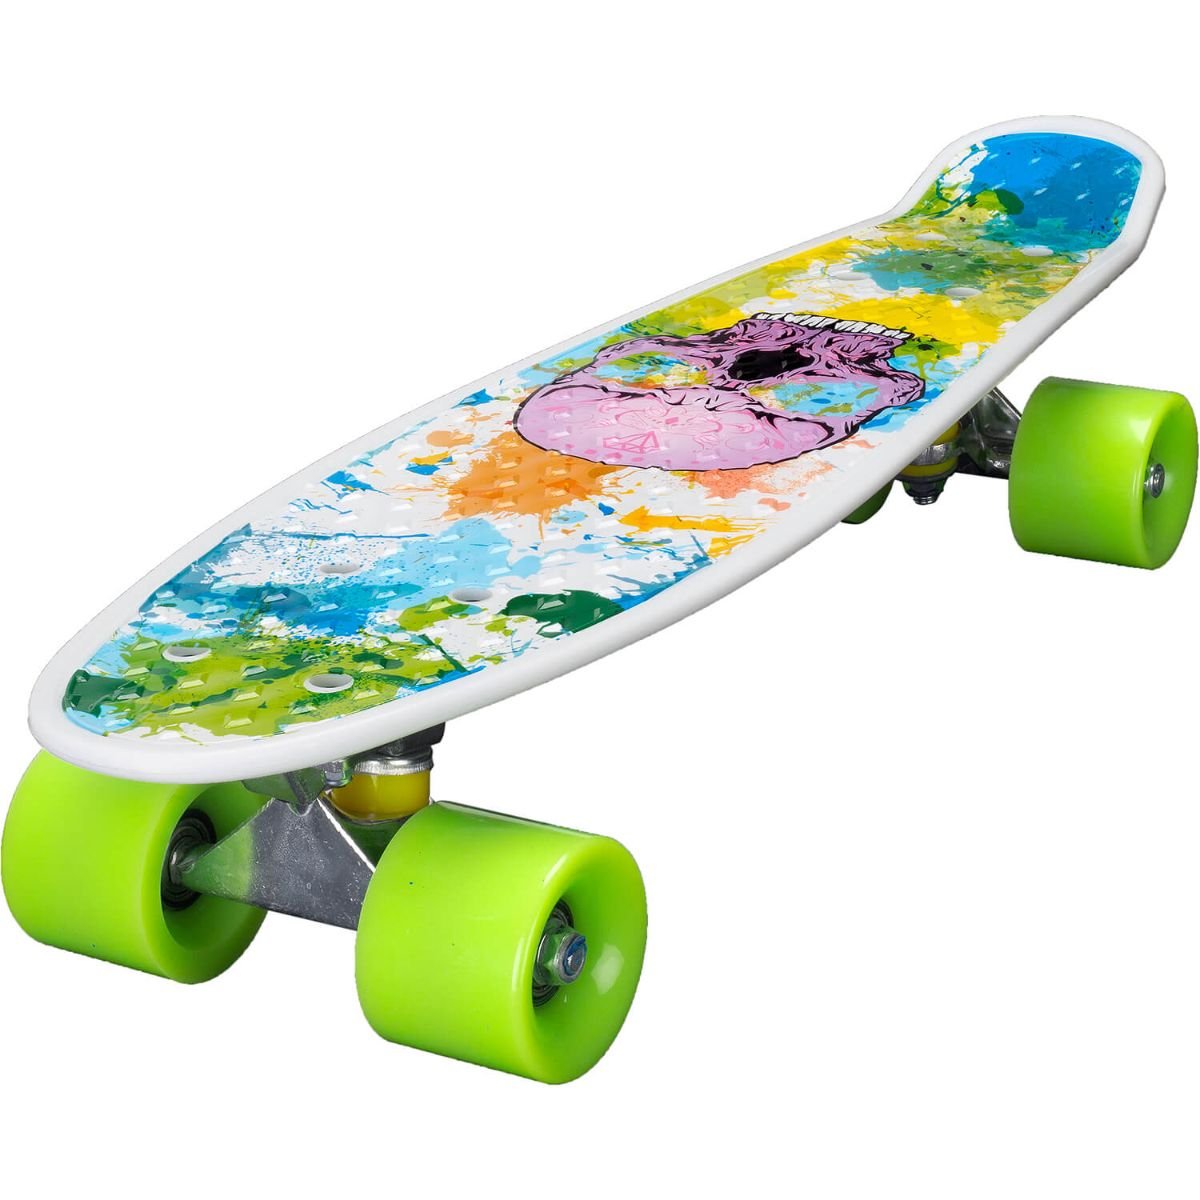 Penny board Action One, 22 ABEC-7 PU, Aluminium Truck, Pink Skull Action One